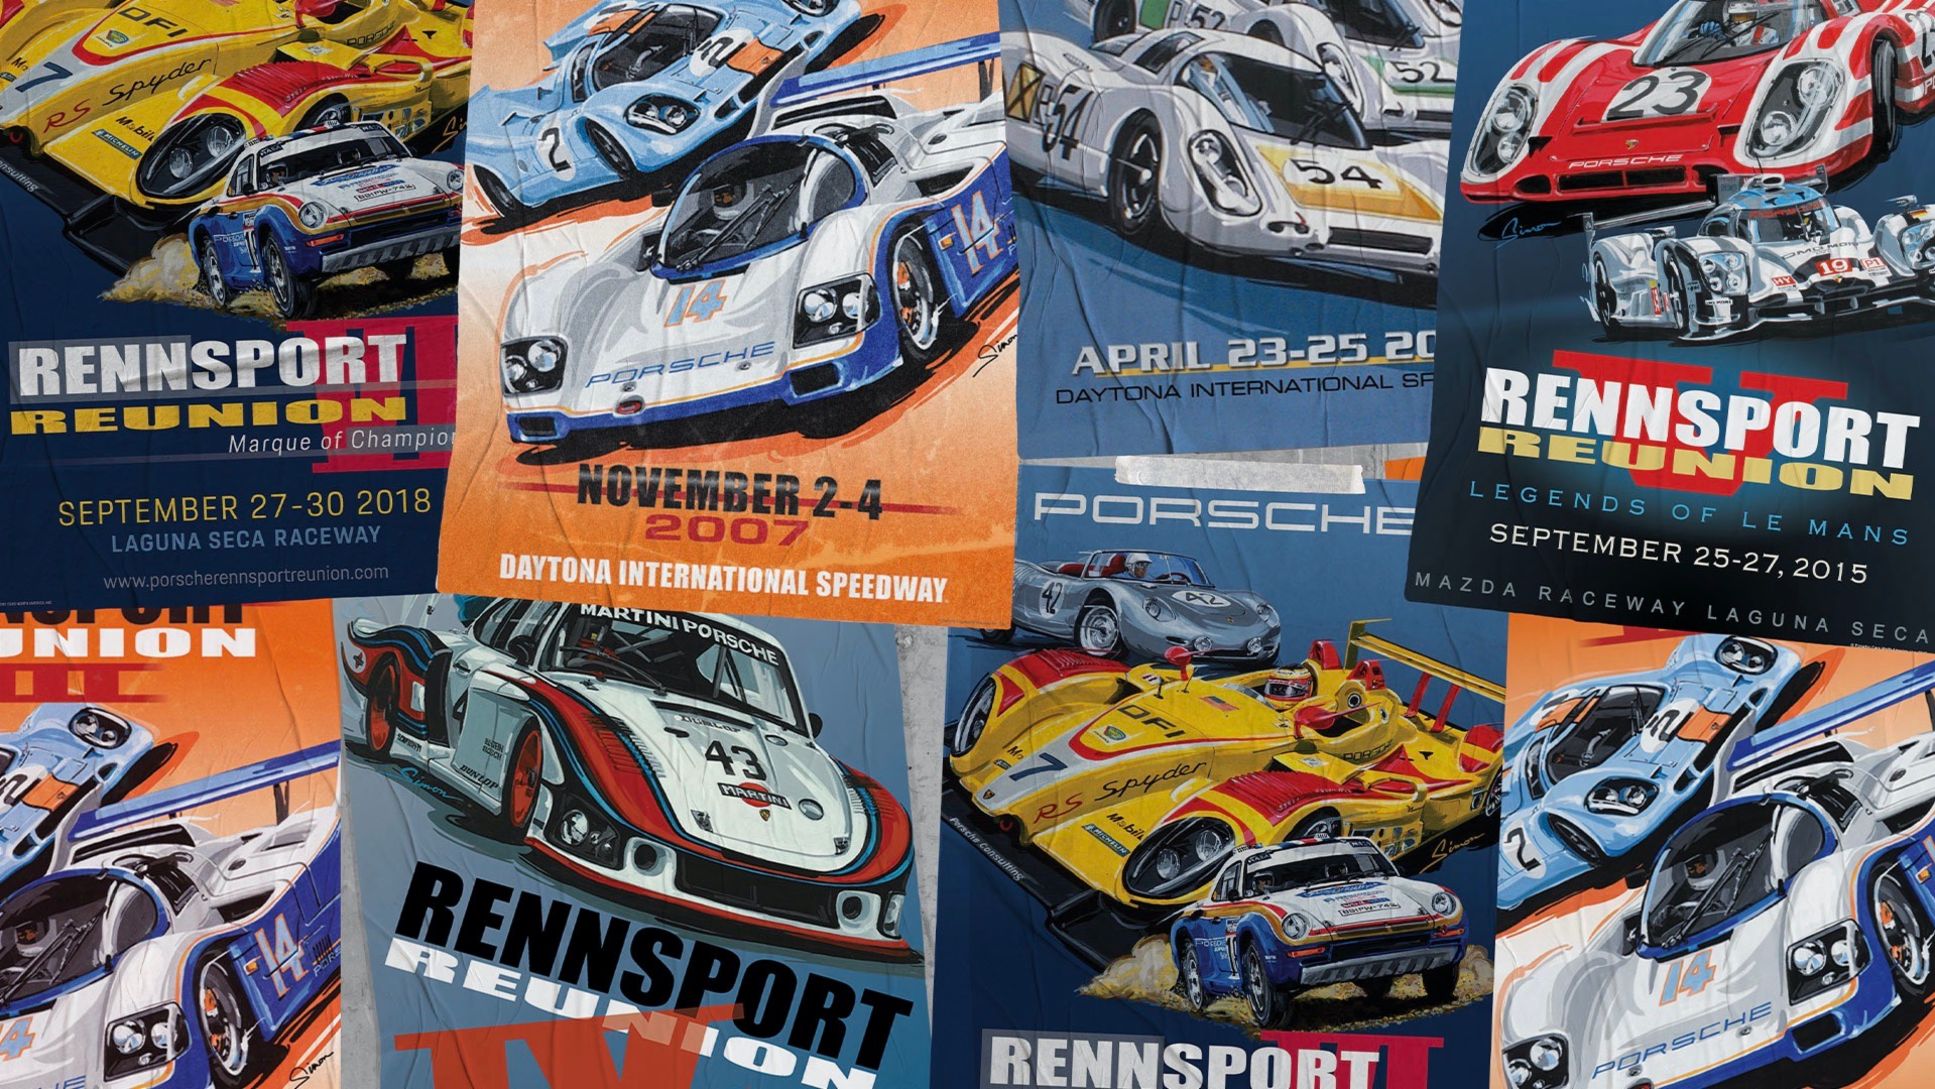 Previous Rennsport Reunion posters collaged together to make the RR7 announcement poster